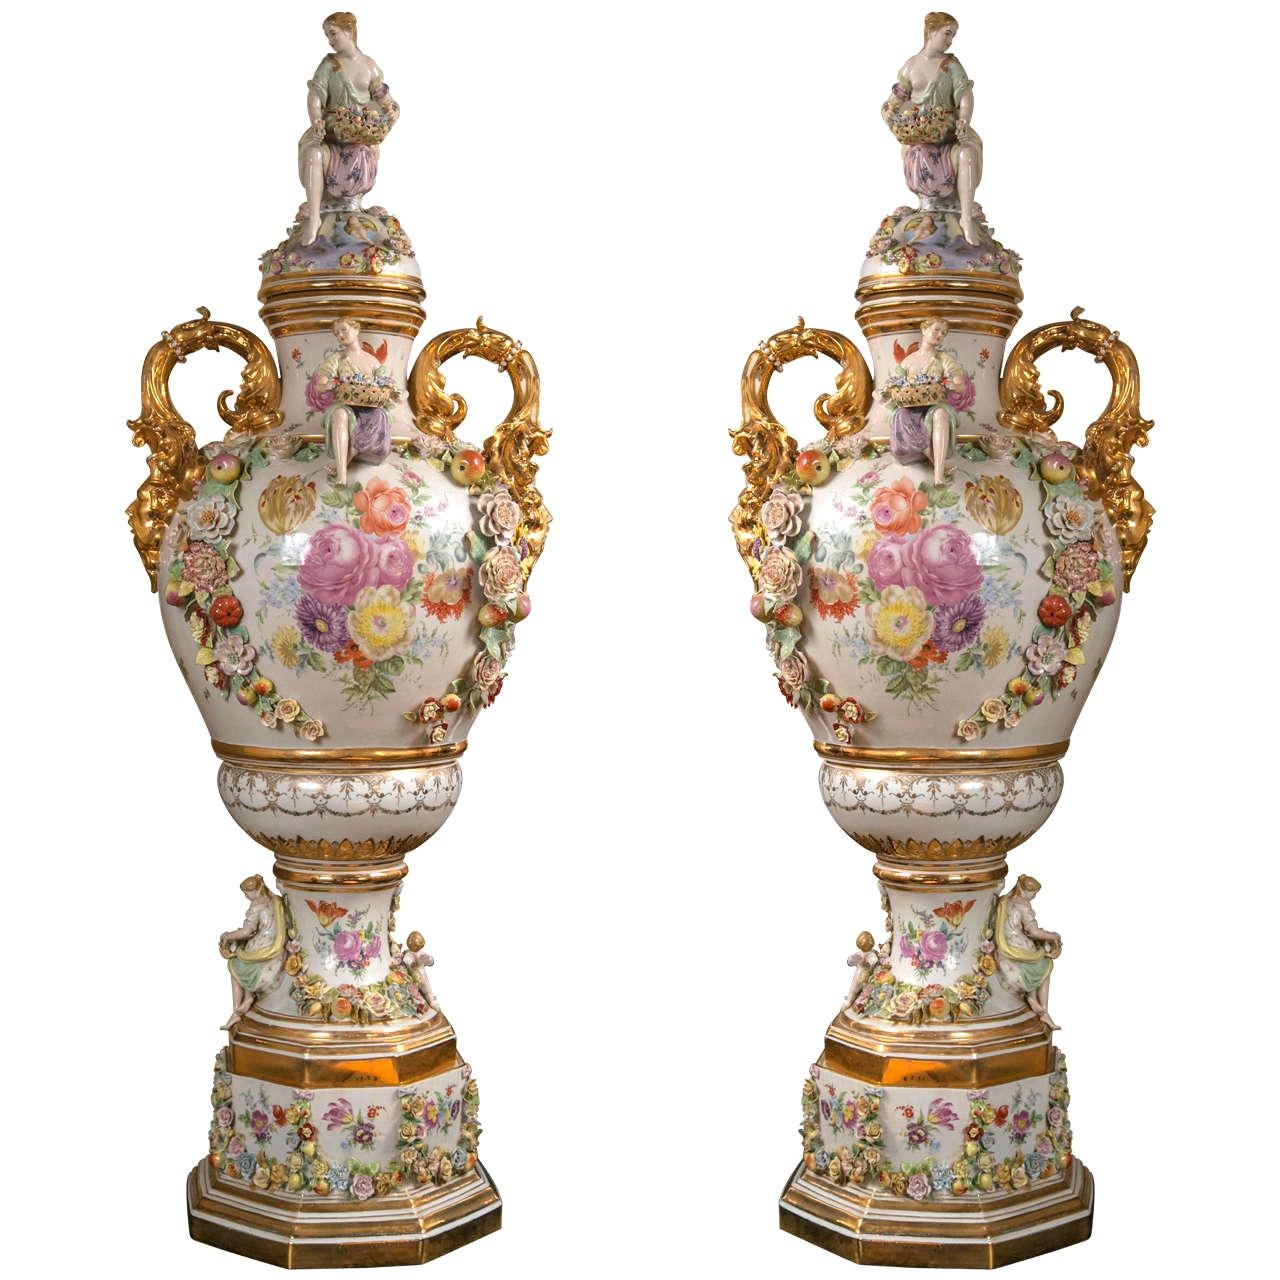 Fantastic Pair of Meissen Style Covered Urns For Sale